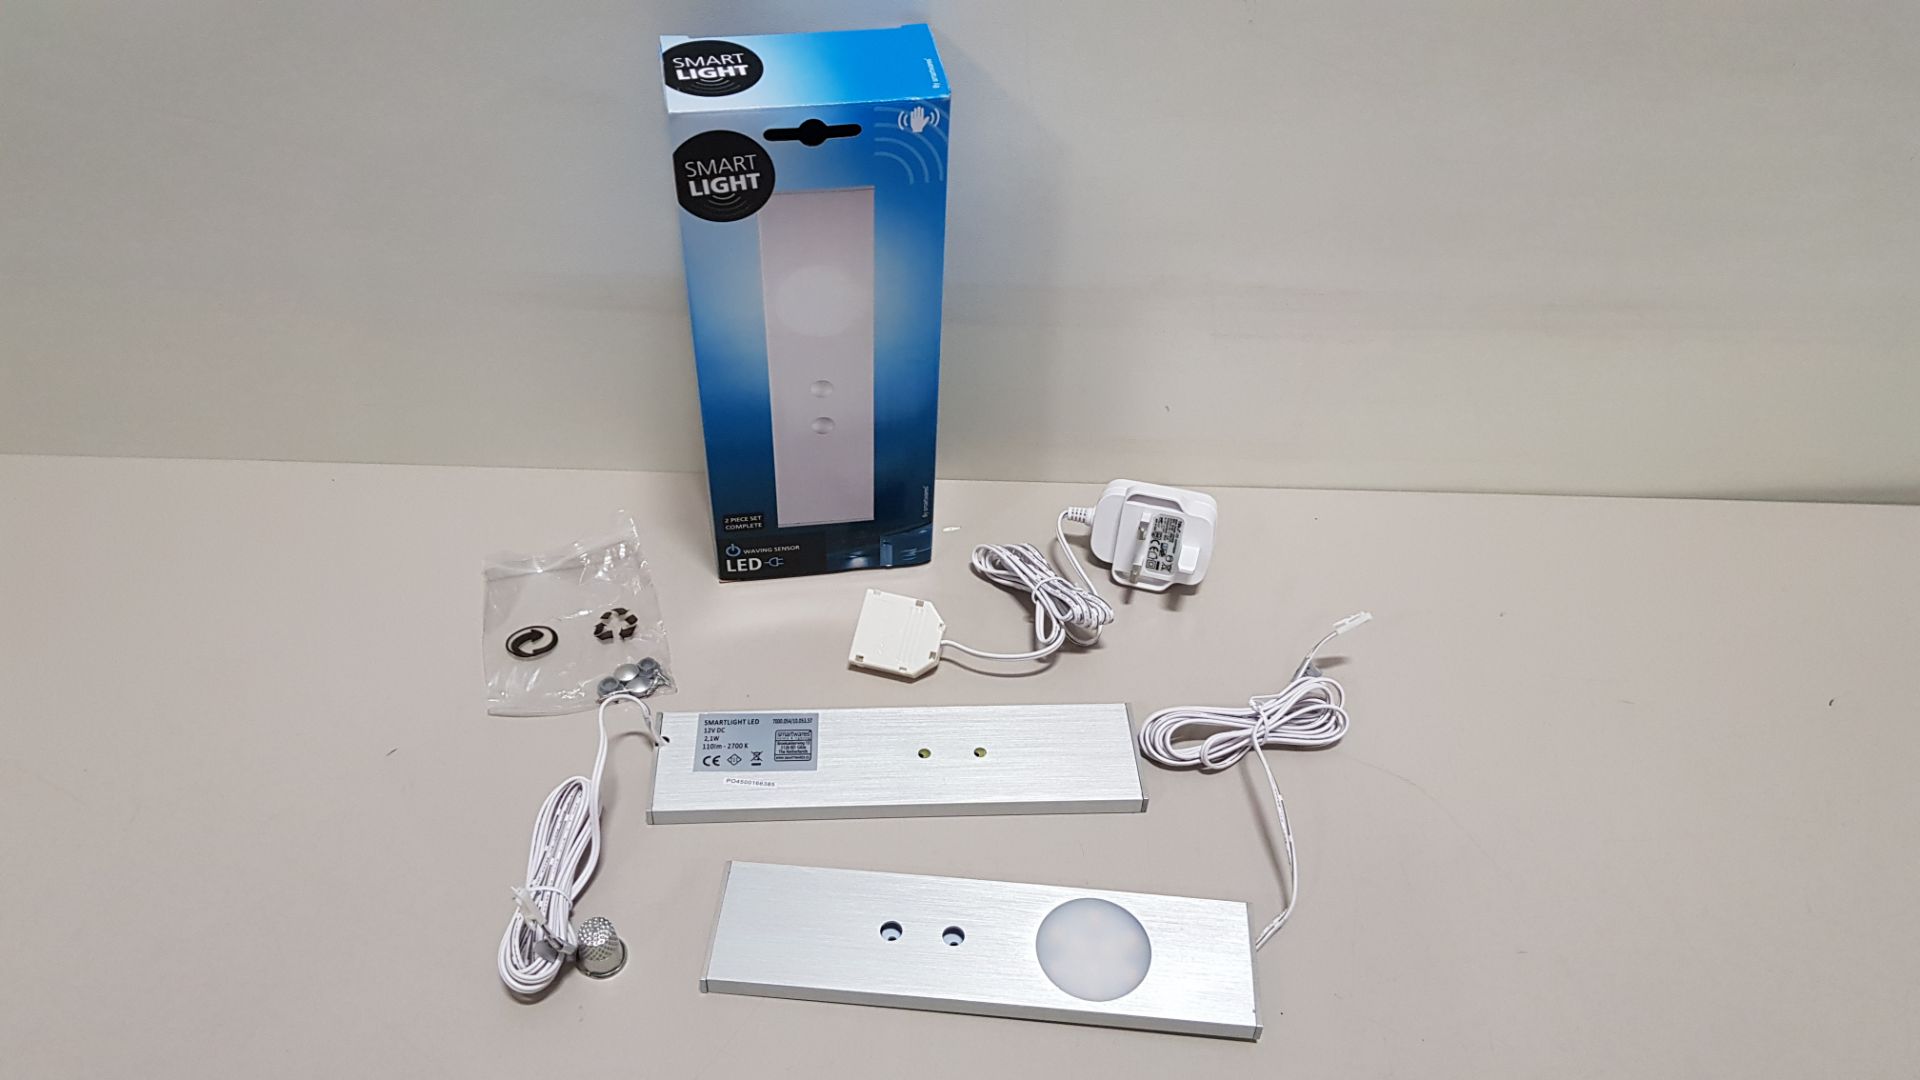 64 X BRAND NEW BOXED SMARTWARES LED UNDER CABINET LIGHT WITH WAVE SENSOR INCLUDED - PROD CODE 10.